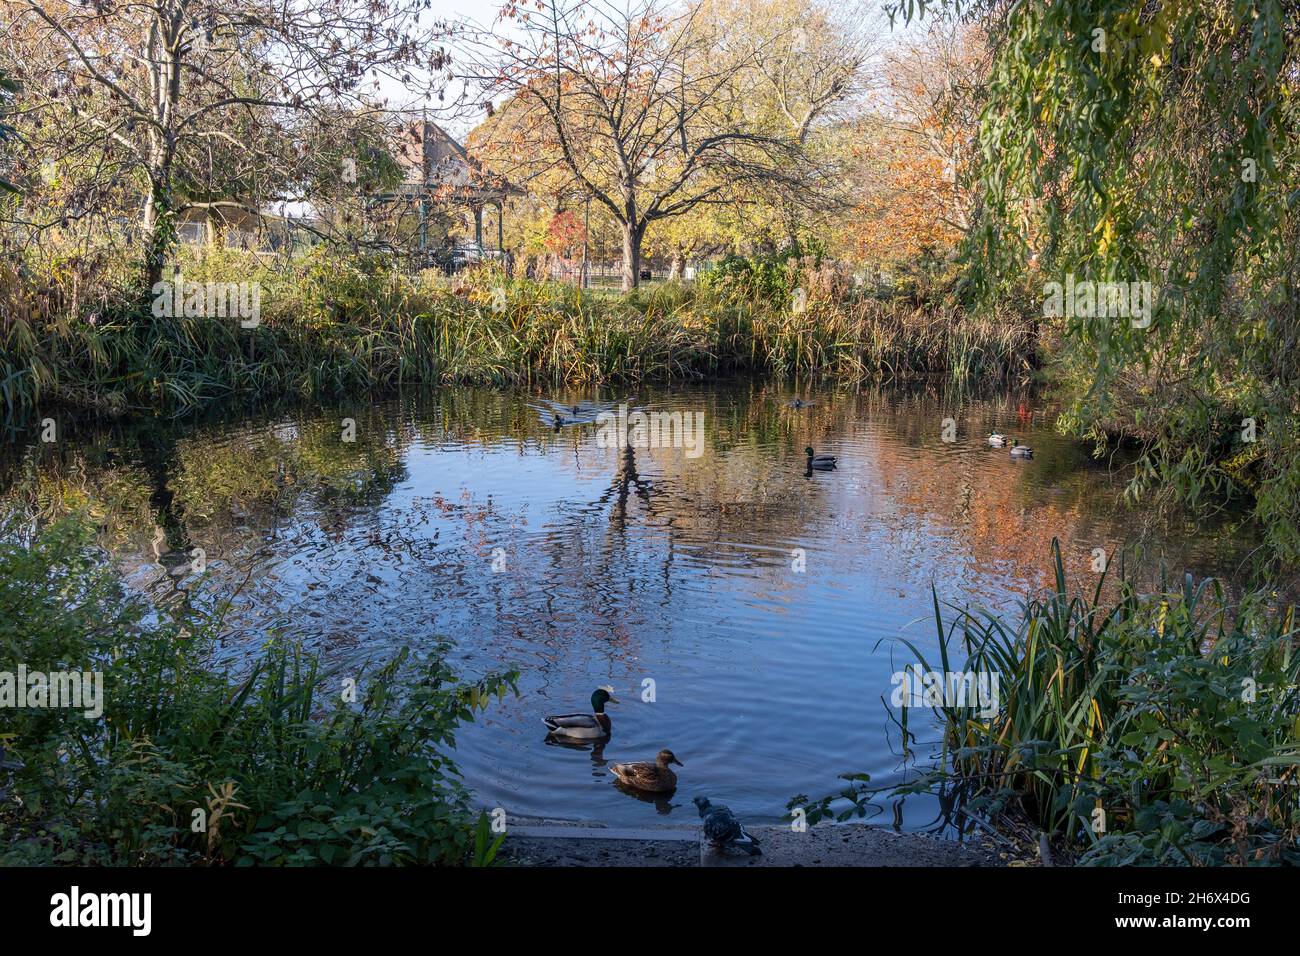 The duck pond and bandstand of Ruskin Park in the south London borough of Lambeth, on 16th November 2021, in London, England. The ornamental pond with its small island is an original feature of the park developed from the former gardens of mansions on Denmark Hill in 1906. Ruskin Park has more than 870 trees and a volunteer tree group which protects the park and promotes it as ‘Lambeth’s Arboretum’. Stock Photo